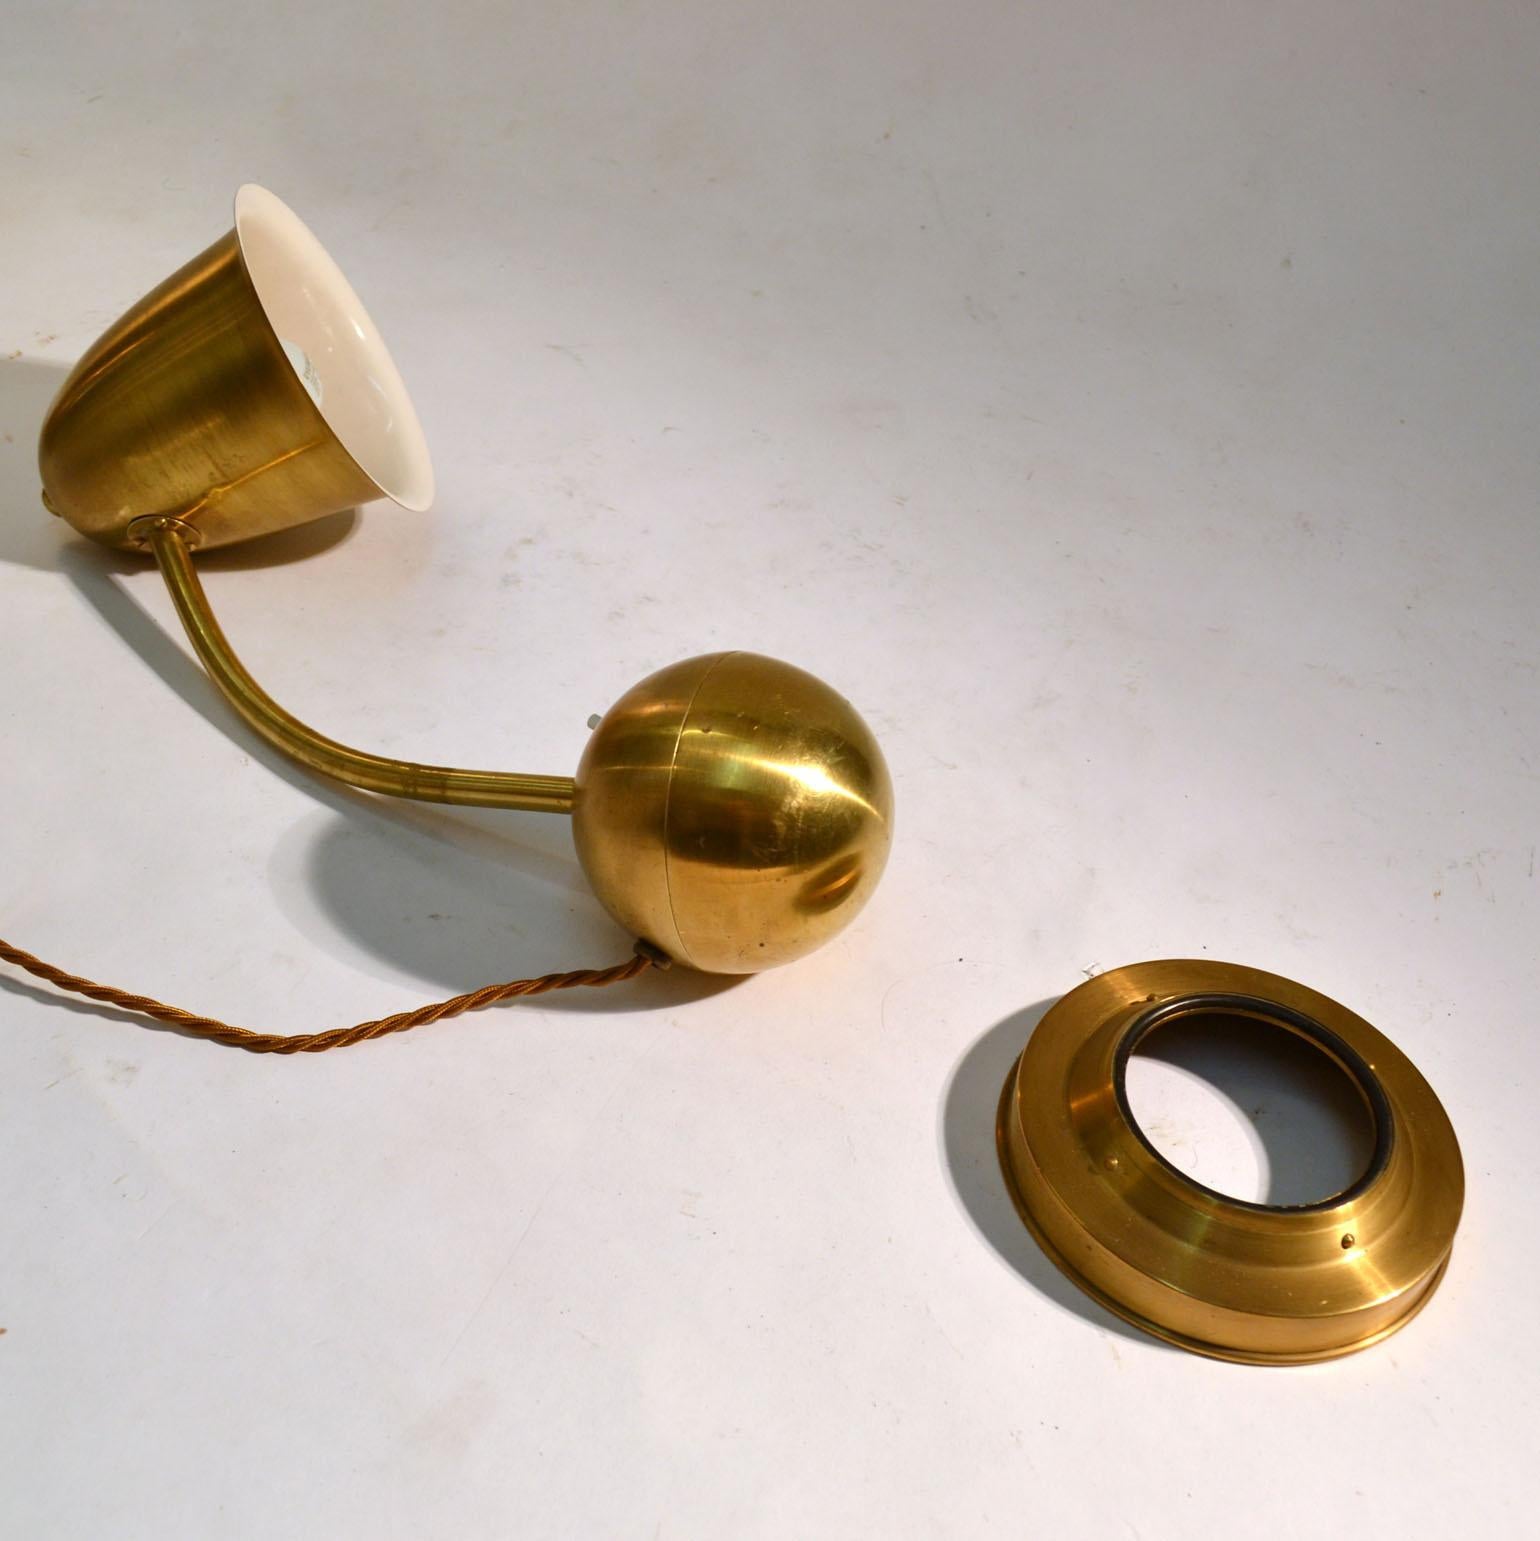 Pair of Modernist Brass Table / Desk Lamps 1930s Lamps by Daalderop Netherlands 3